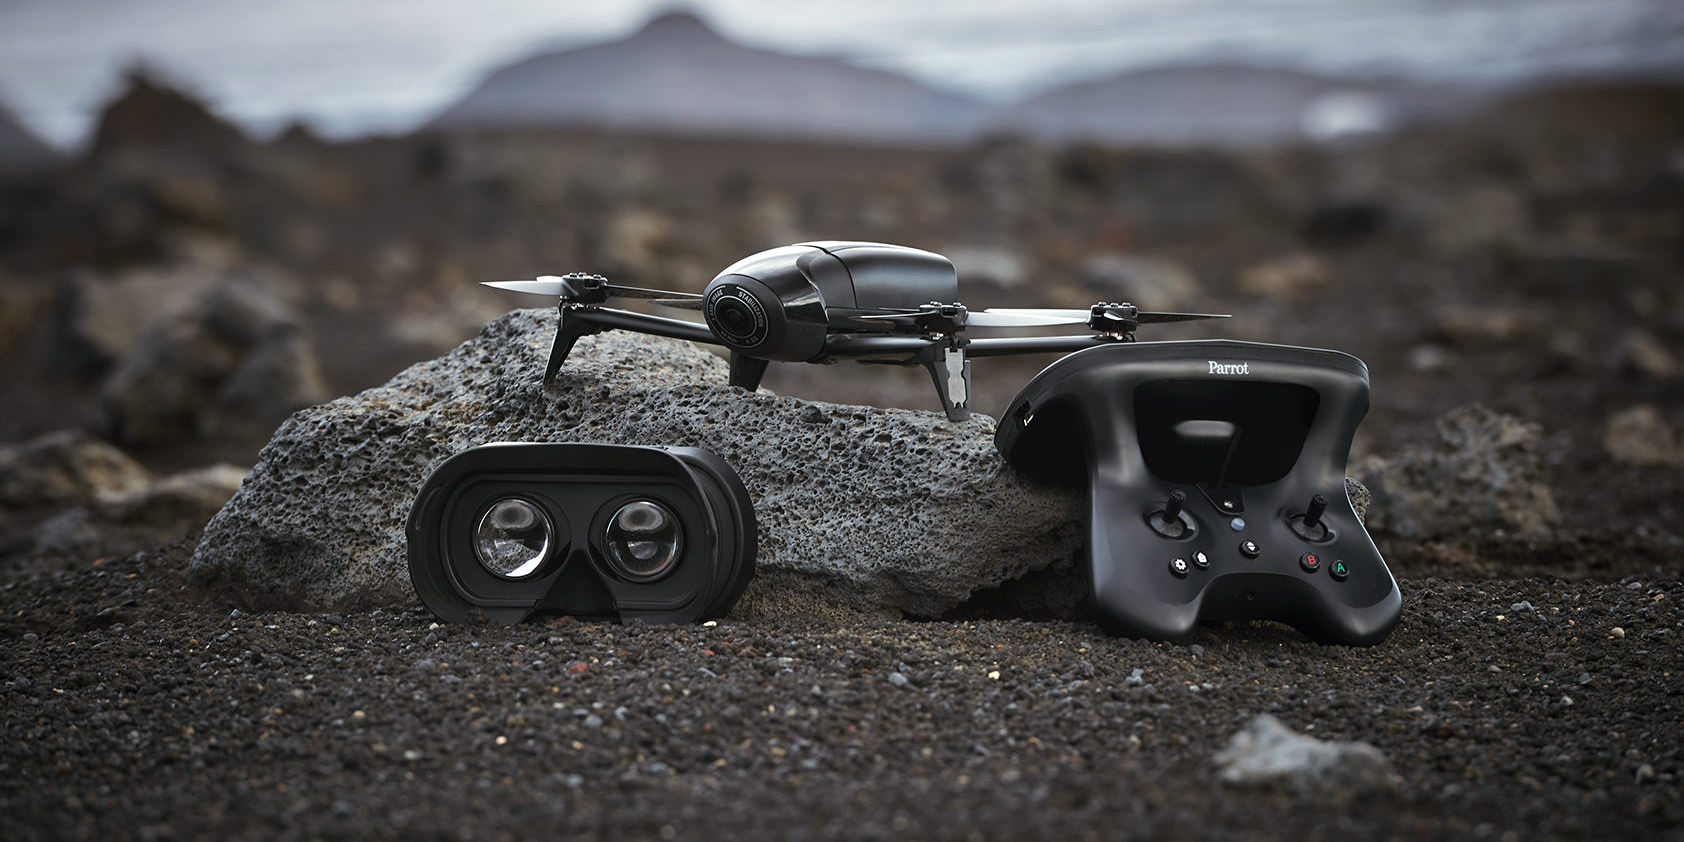 Rank Abuse Dispensing Parrot launches Bebop 2 Power drone with longer flight time and new  features - 9to5Mac